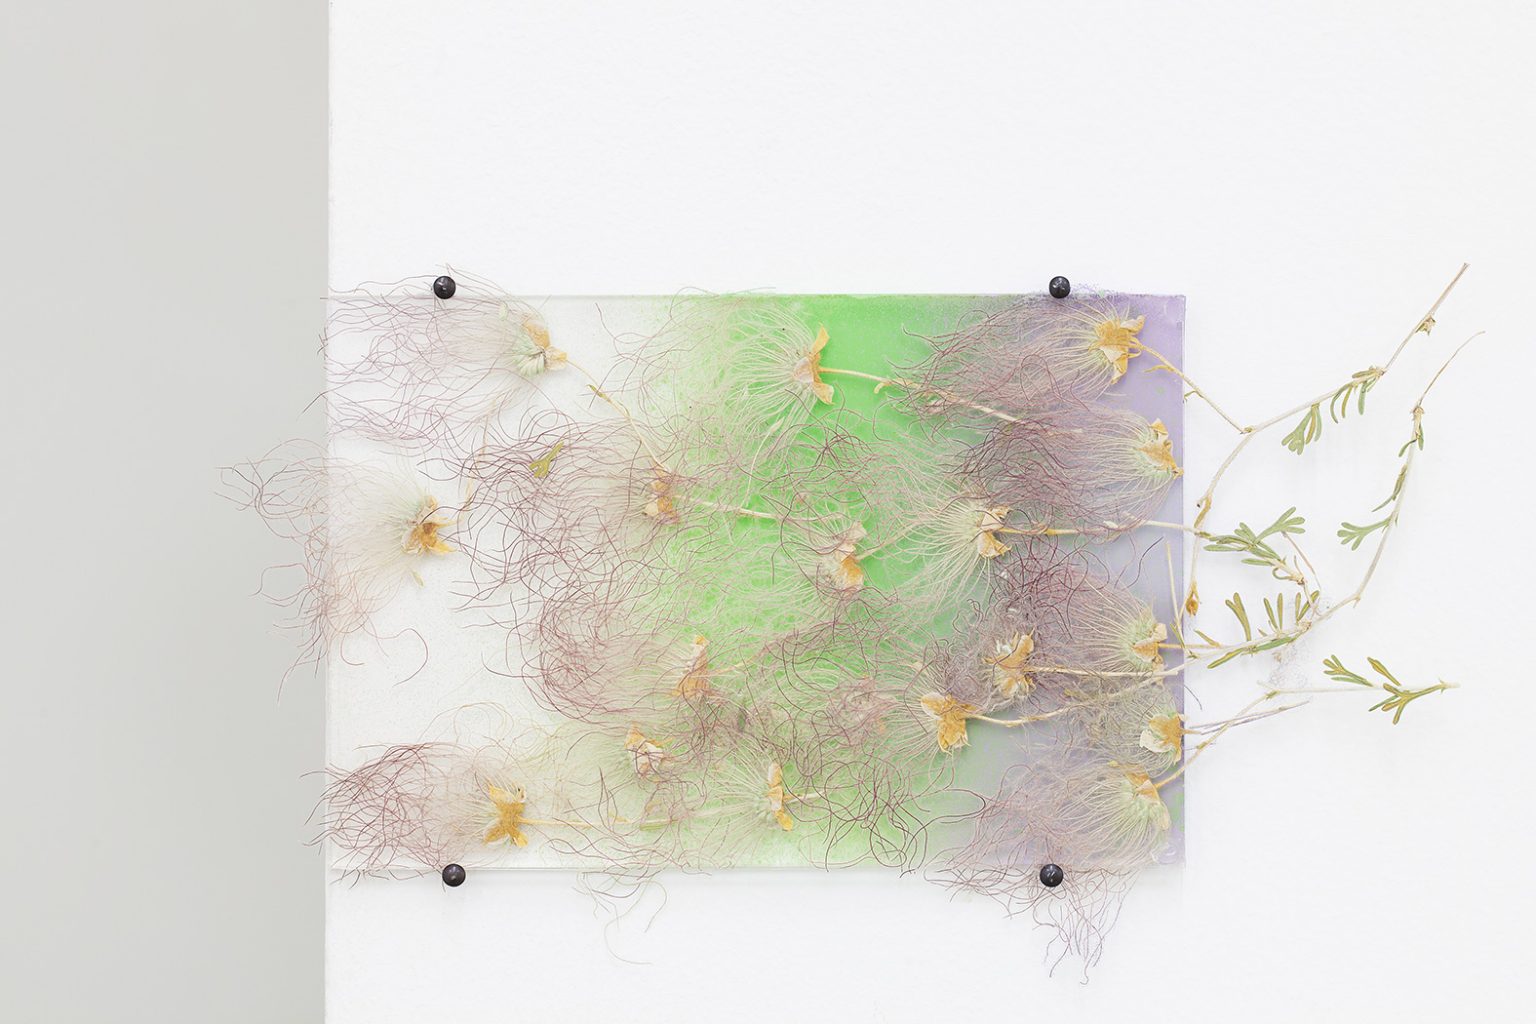 Doing life: By way of pressed apache plumes_2012, 10x15 cm, pressed flowers, glass, spray paint